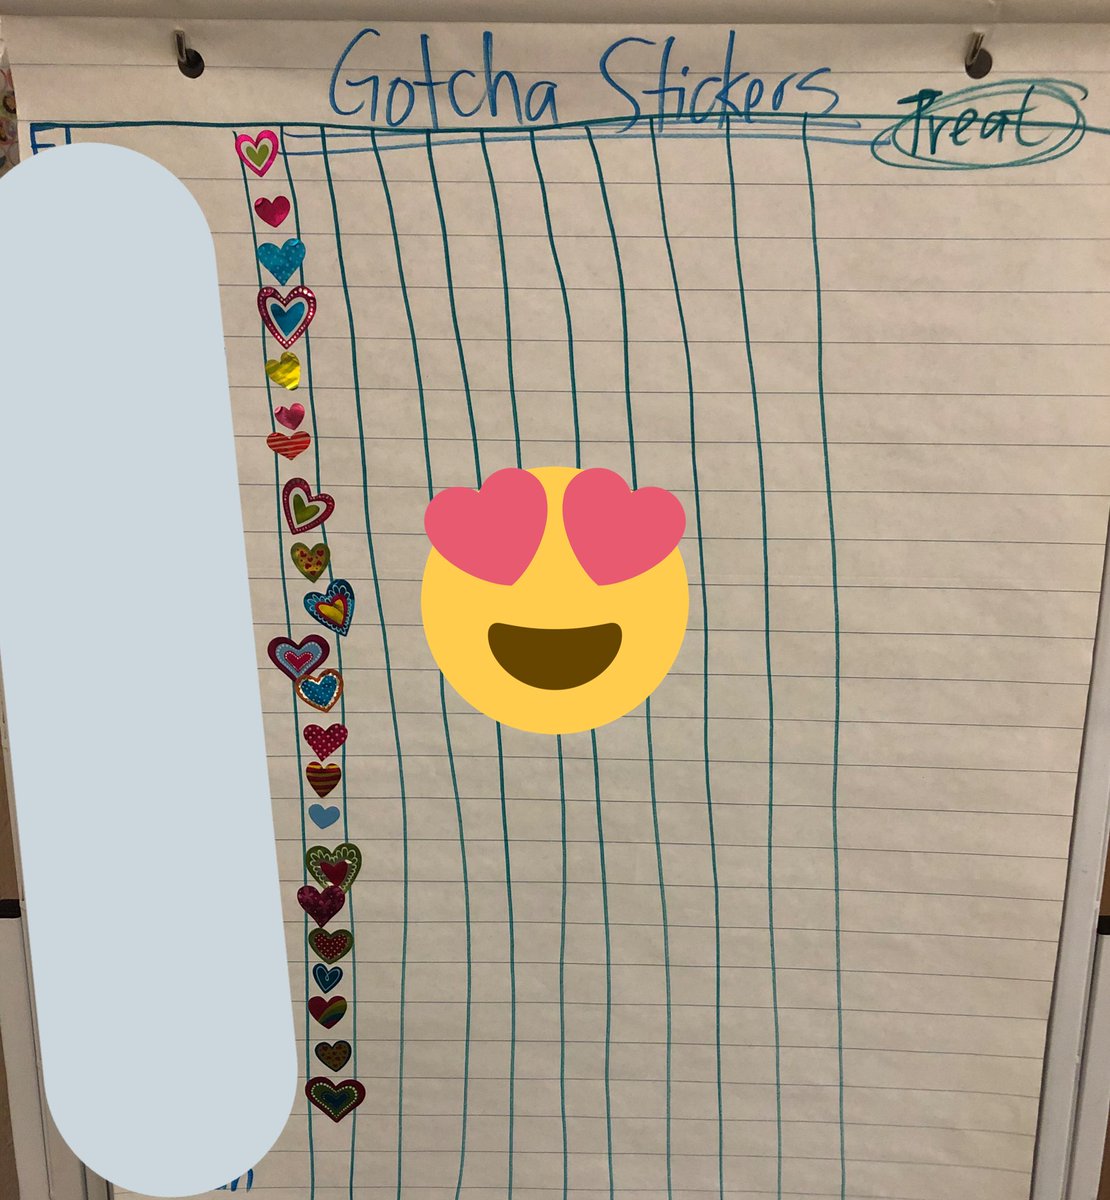 We inspire our little learners with a visual of a job well done in our #Gotcha moments that allow them to earn their #GotchaStickers so far it’s been great & they are so excited to showcase their awesomeness 👏🏽 @ThornwoodPS Earn 10 stickers a treat await #positiveencouragement